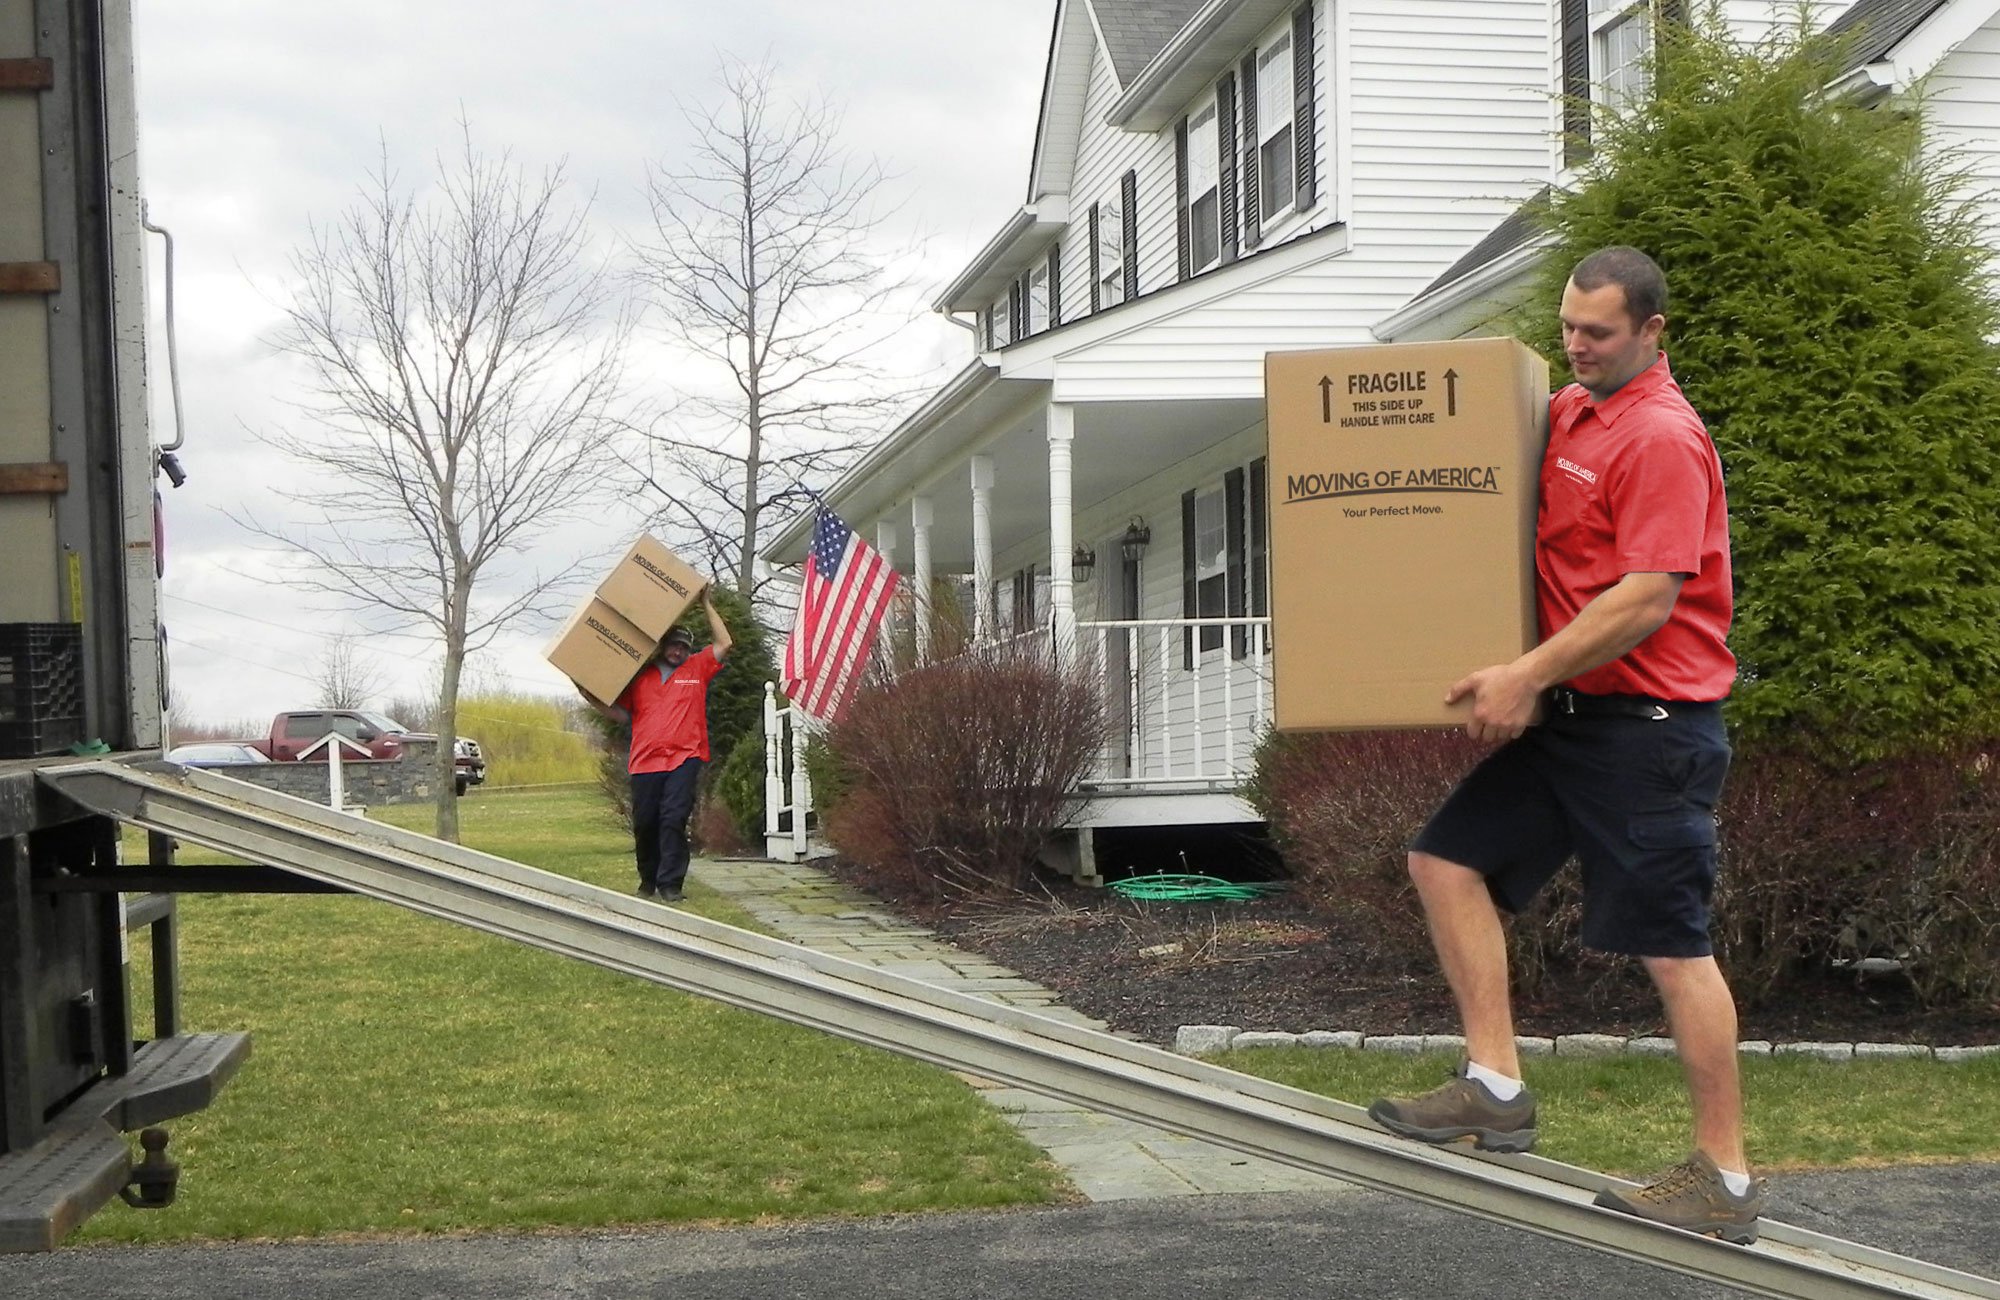 Moving of America’s Expert Senior Movers Are Your Partners in Relocation